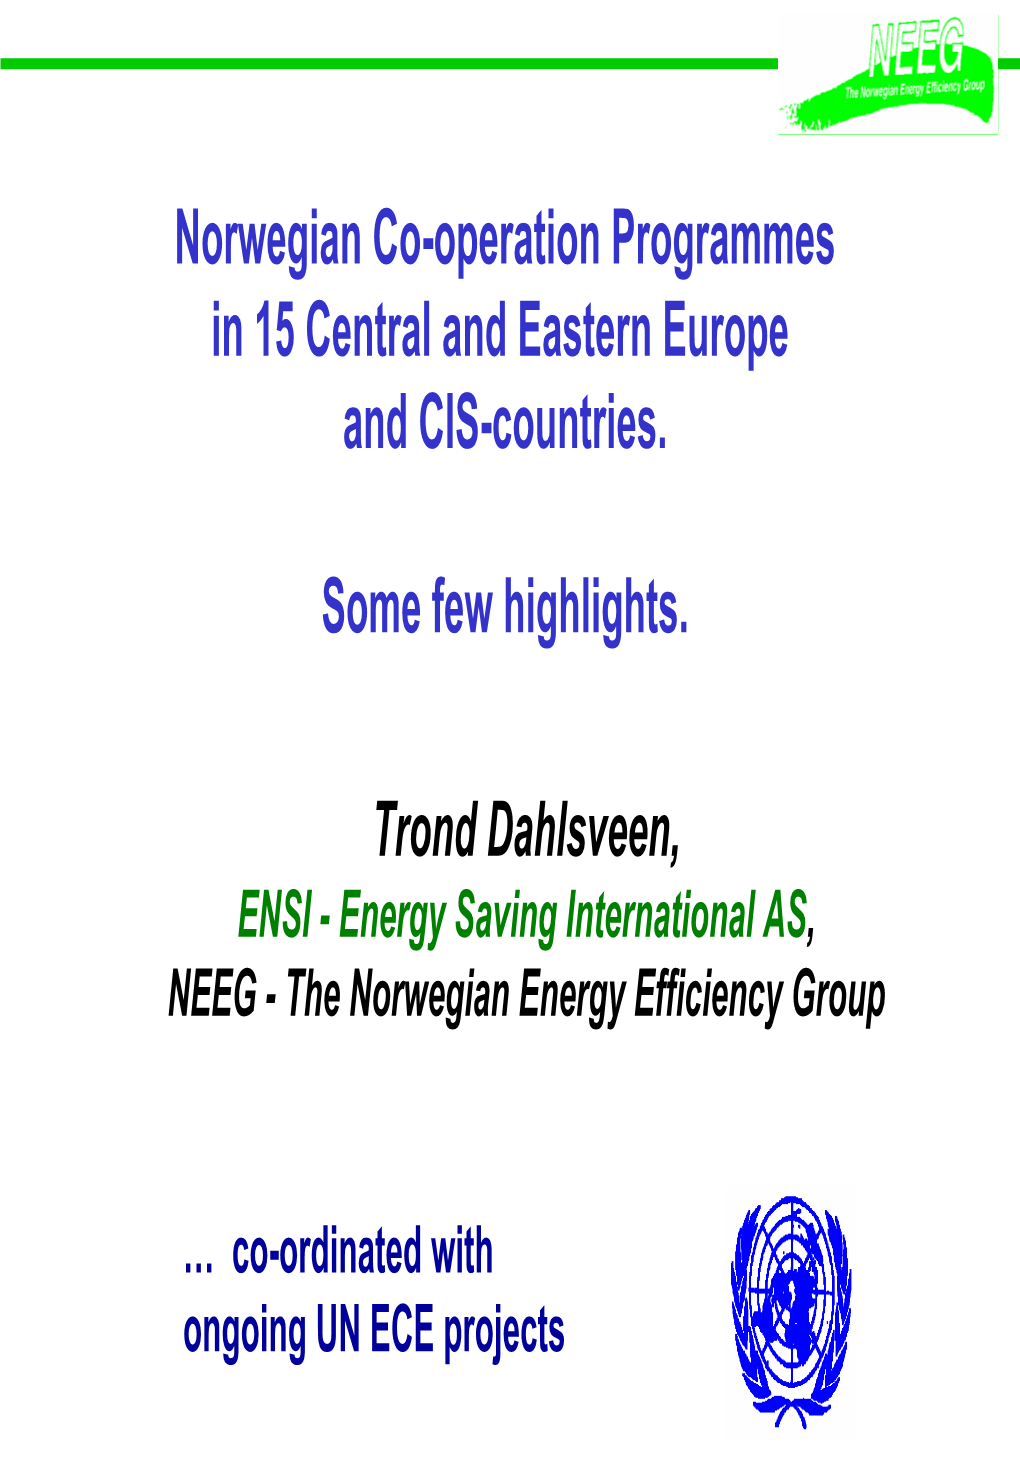 Energy Efficiency and Cleaner Production from Norway "Transfer of Know-How"